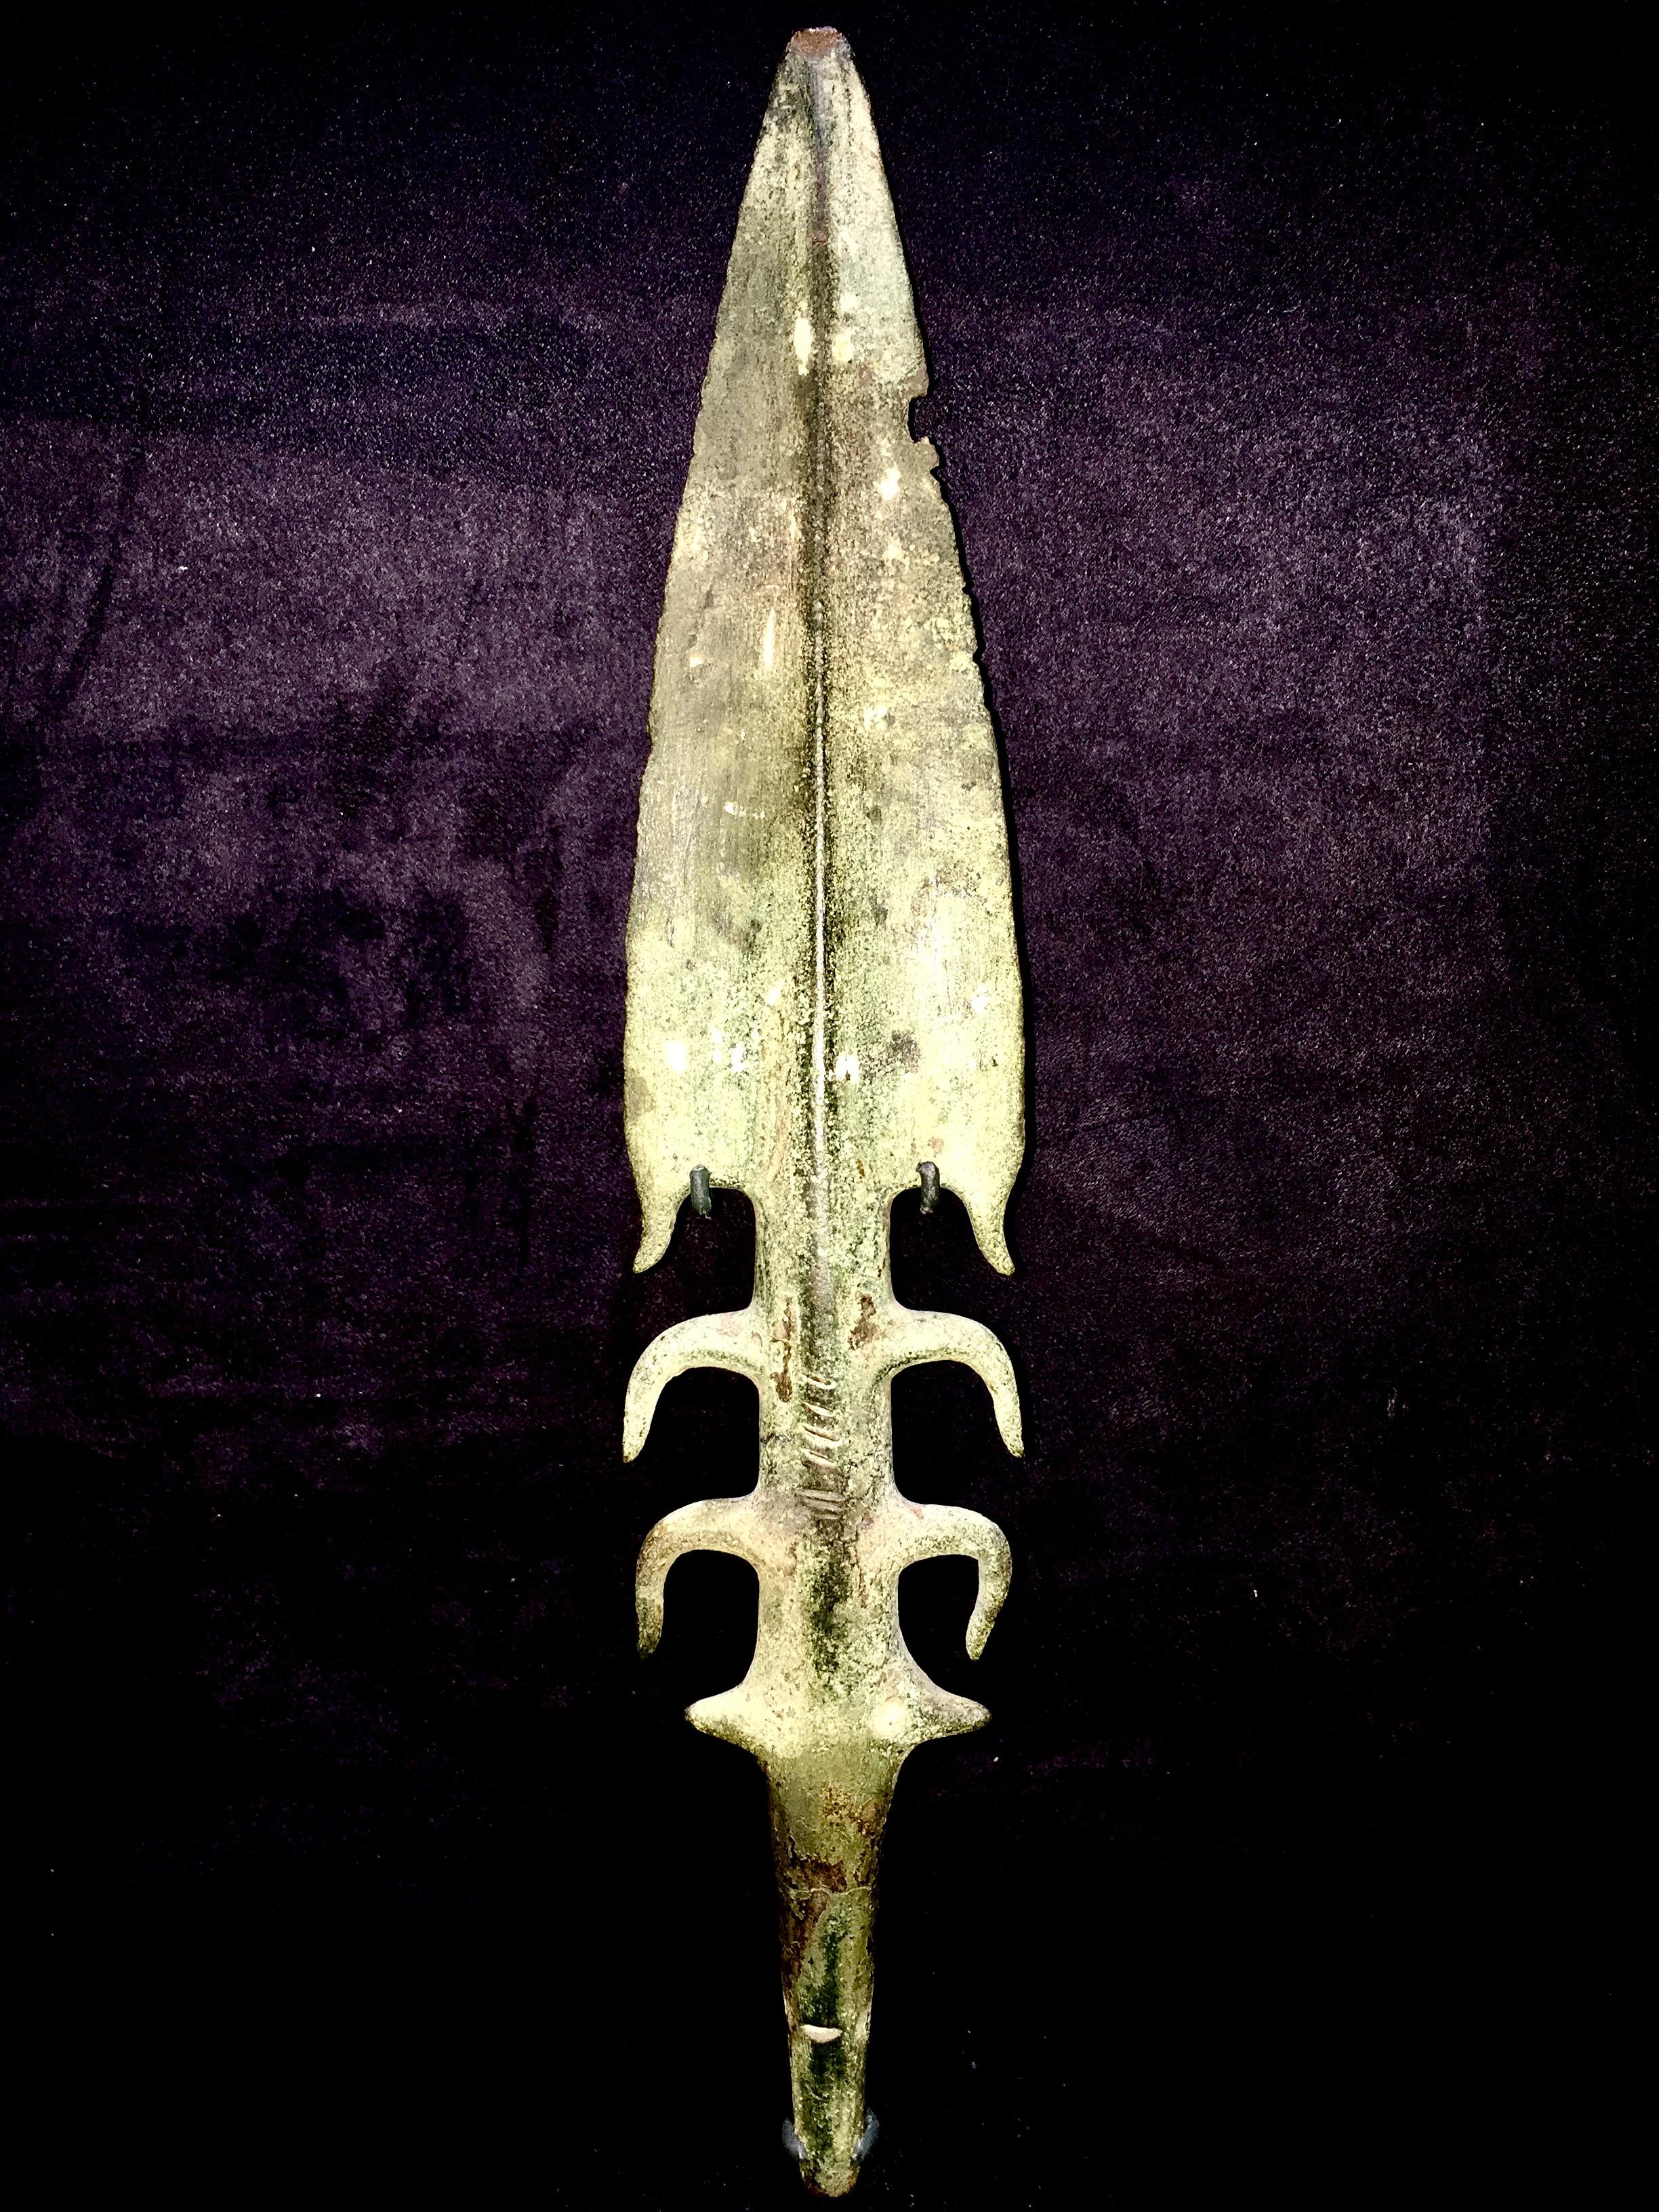 A substantial bronze spearhead or harpoon with thick midrib, triangular barbed blade, two pairs of lateral barbs and a pair of pierced spikes above a round-section tang. Very rare. This piece comes with a custom stand in black matte finish and